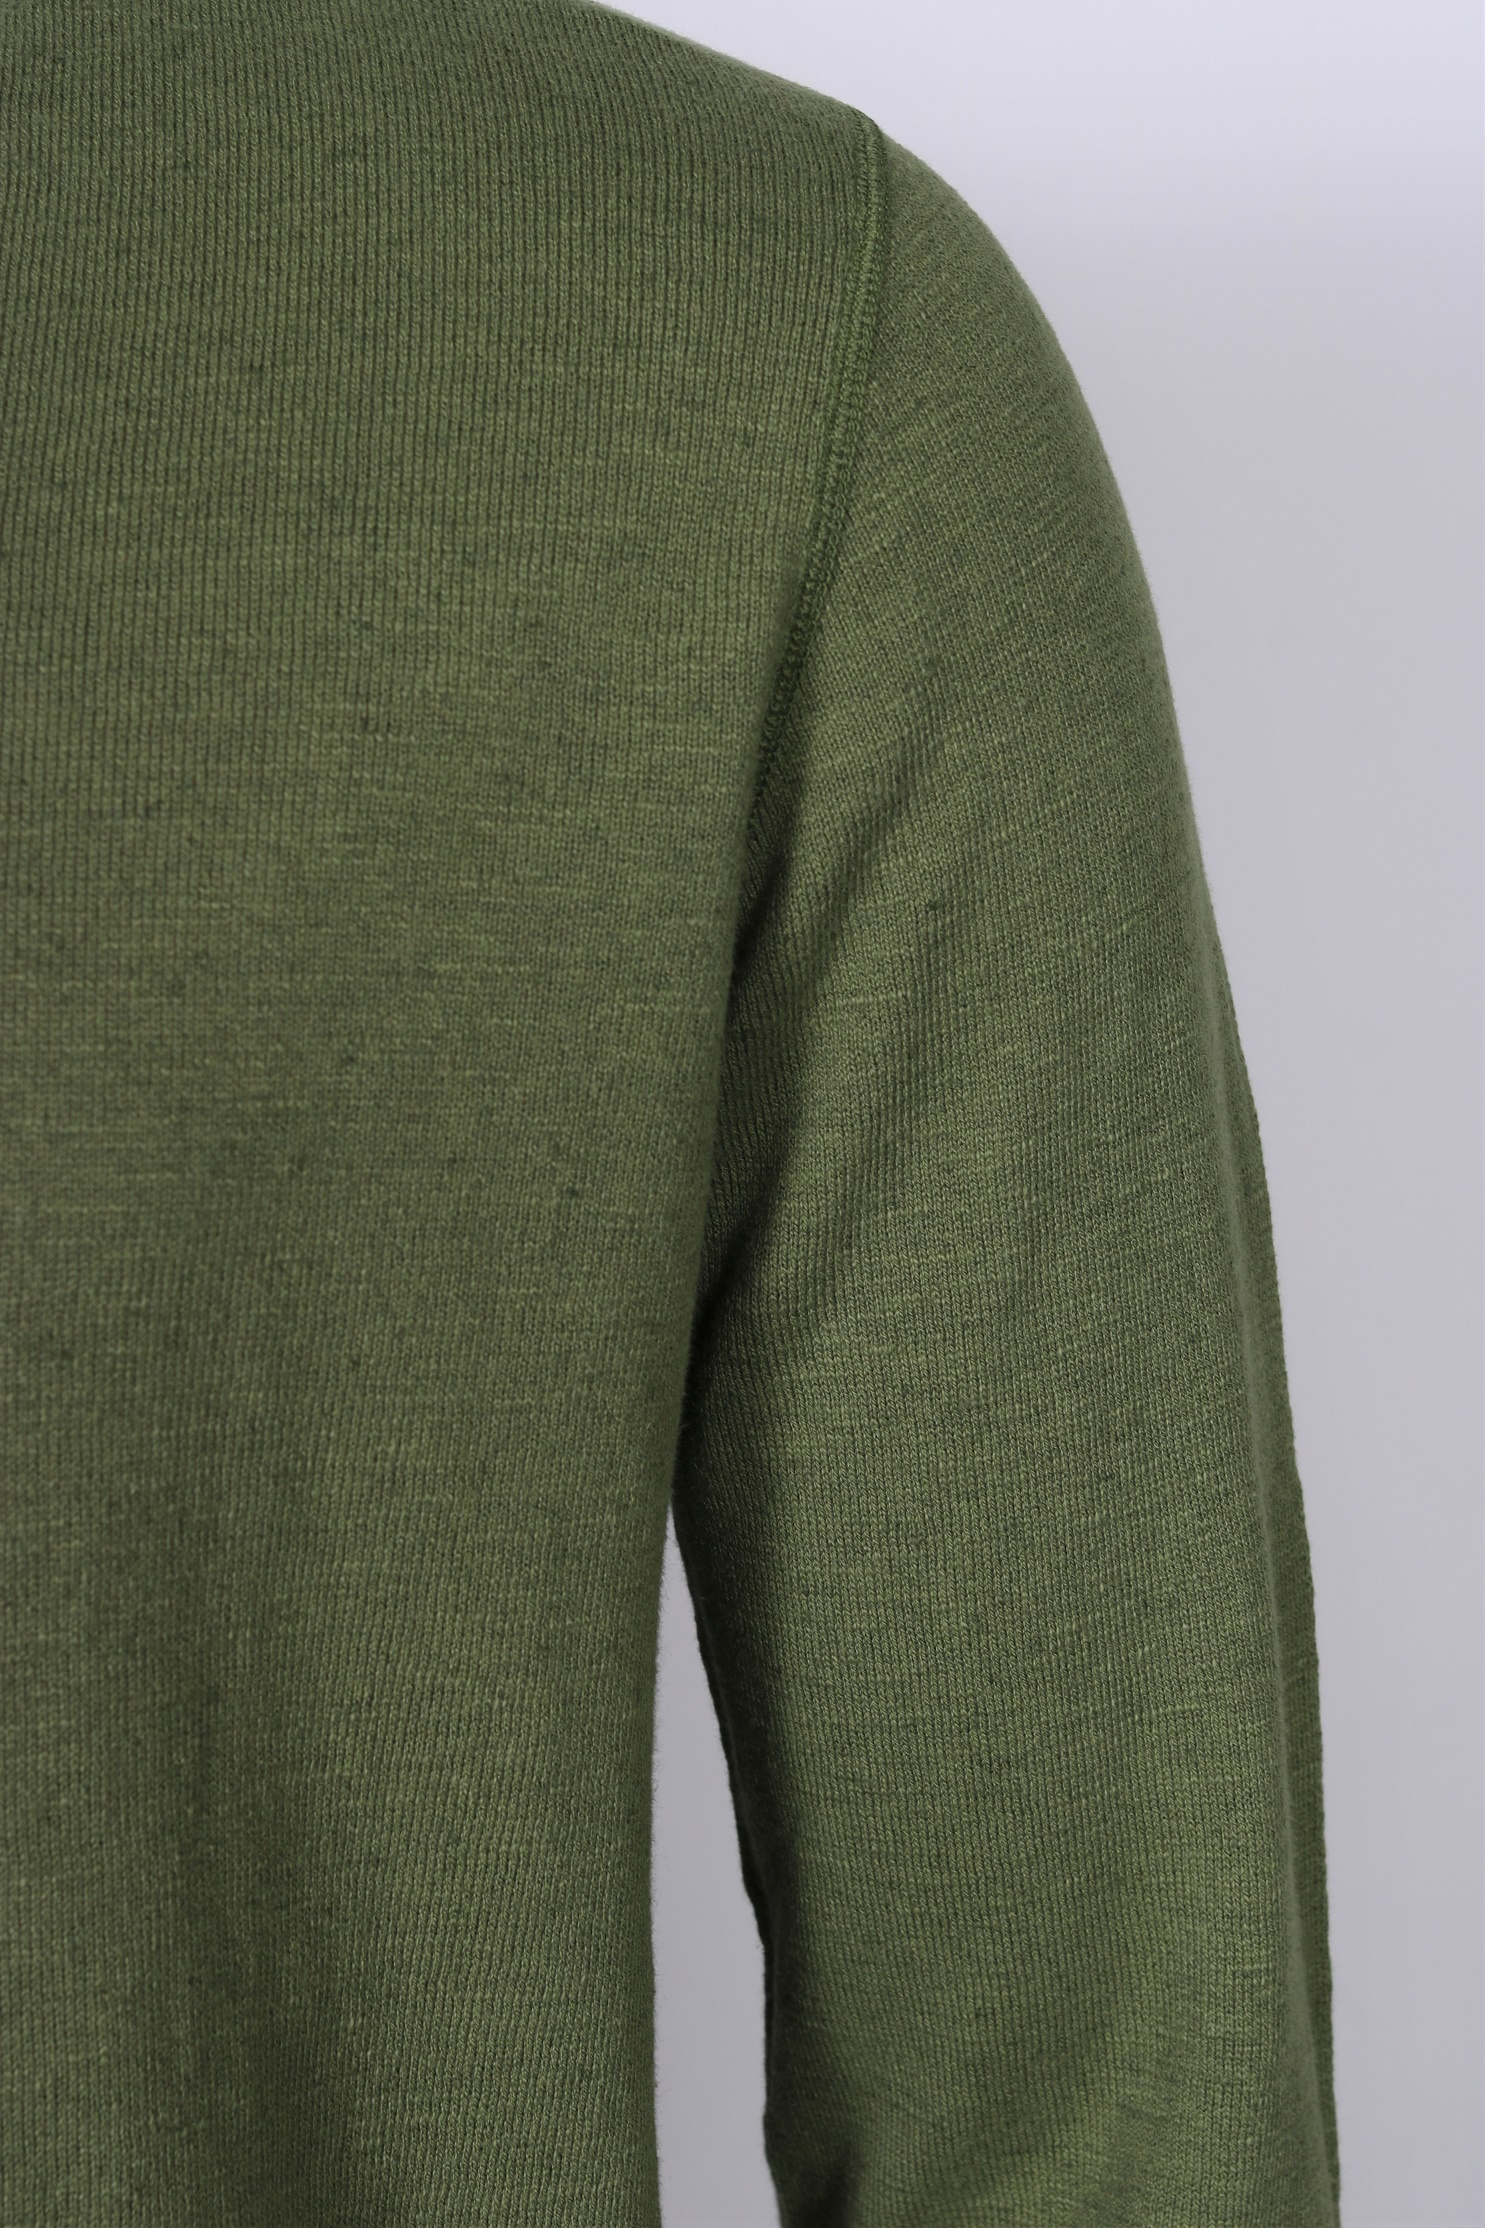 Hannes Roether V-Neck Knit Sweater in Pesto